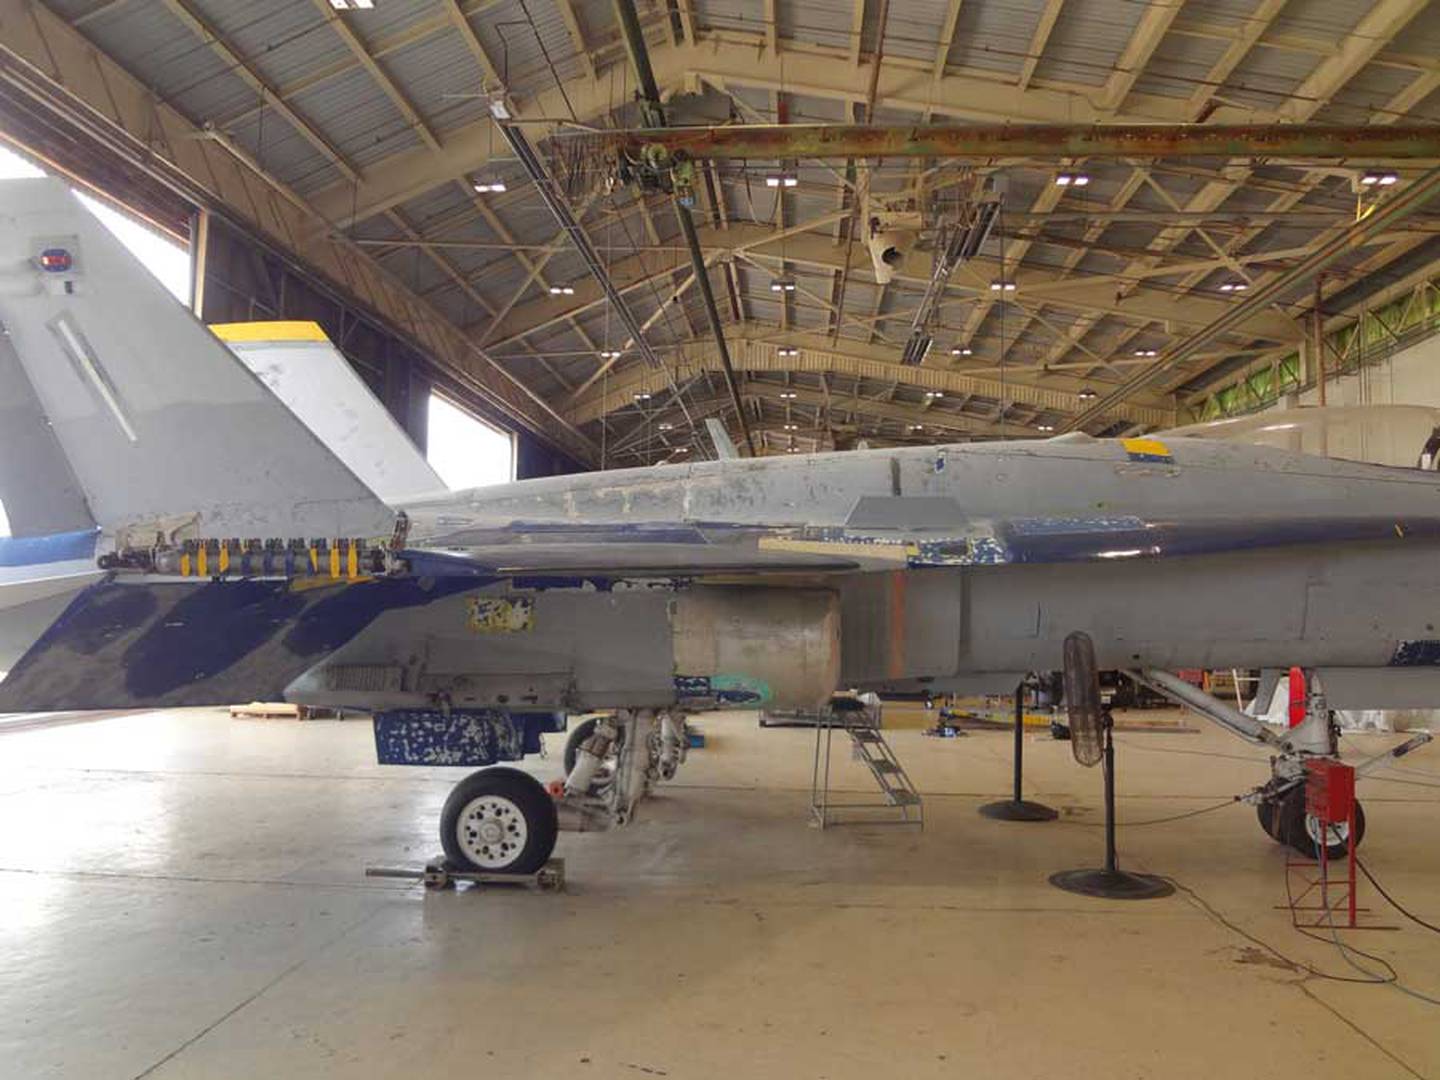 The F/A-18 Hornet Mark Fox flew when he faced a MiG during Operation Desert Storm being restored to display at the Naval Aviation Museum in Pensacola.